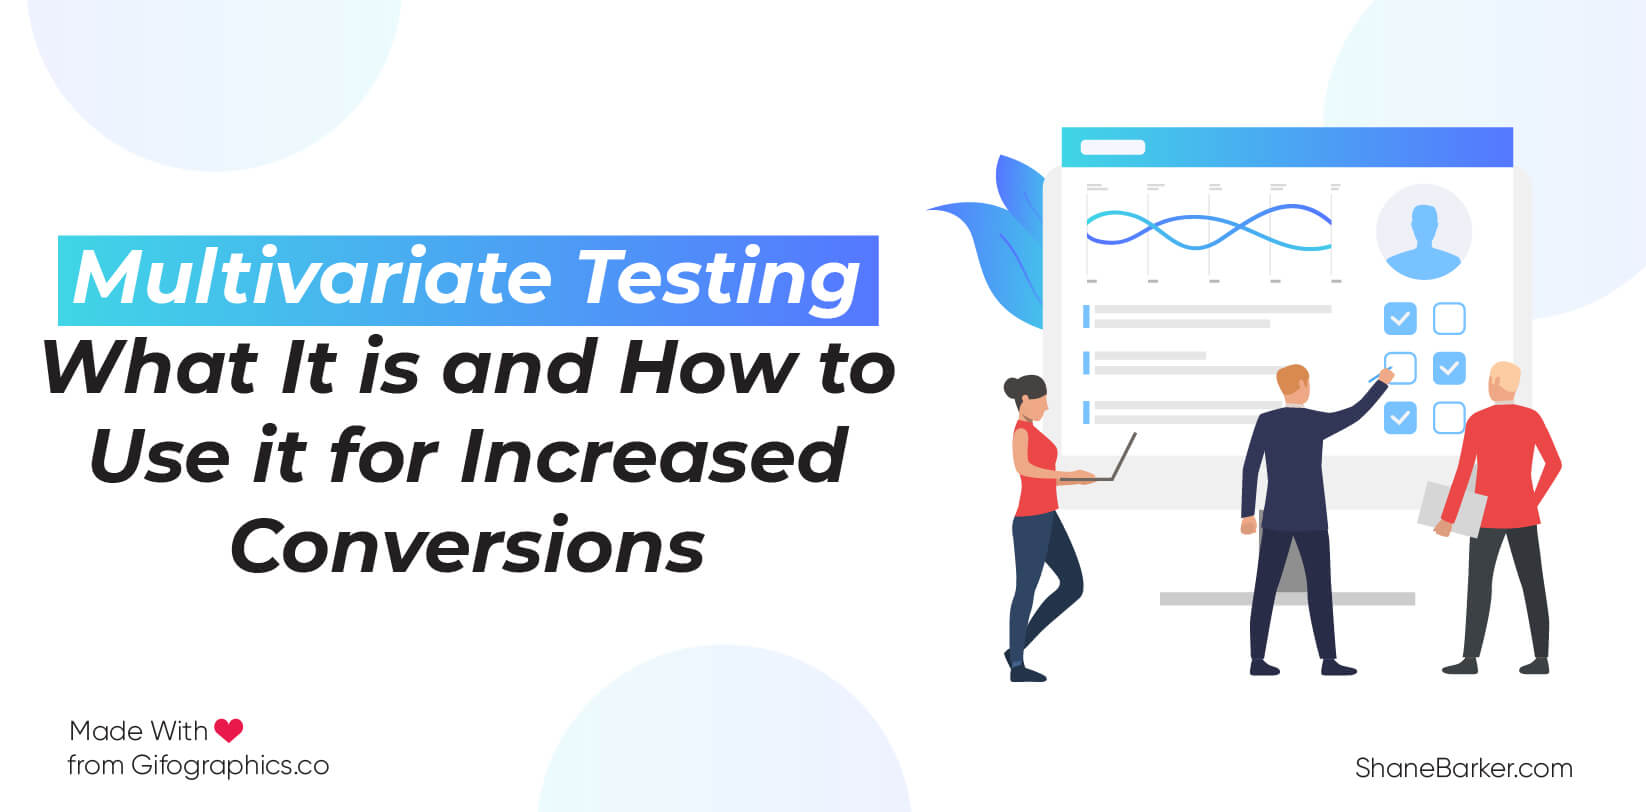 Multivariate Testing What It is and How to Use it for Increased Conversions